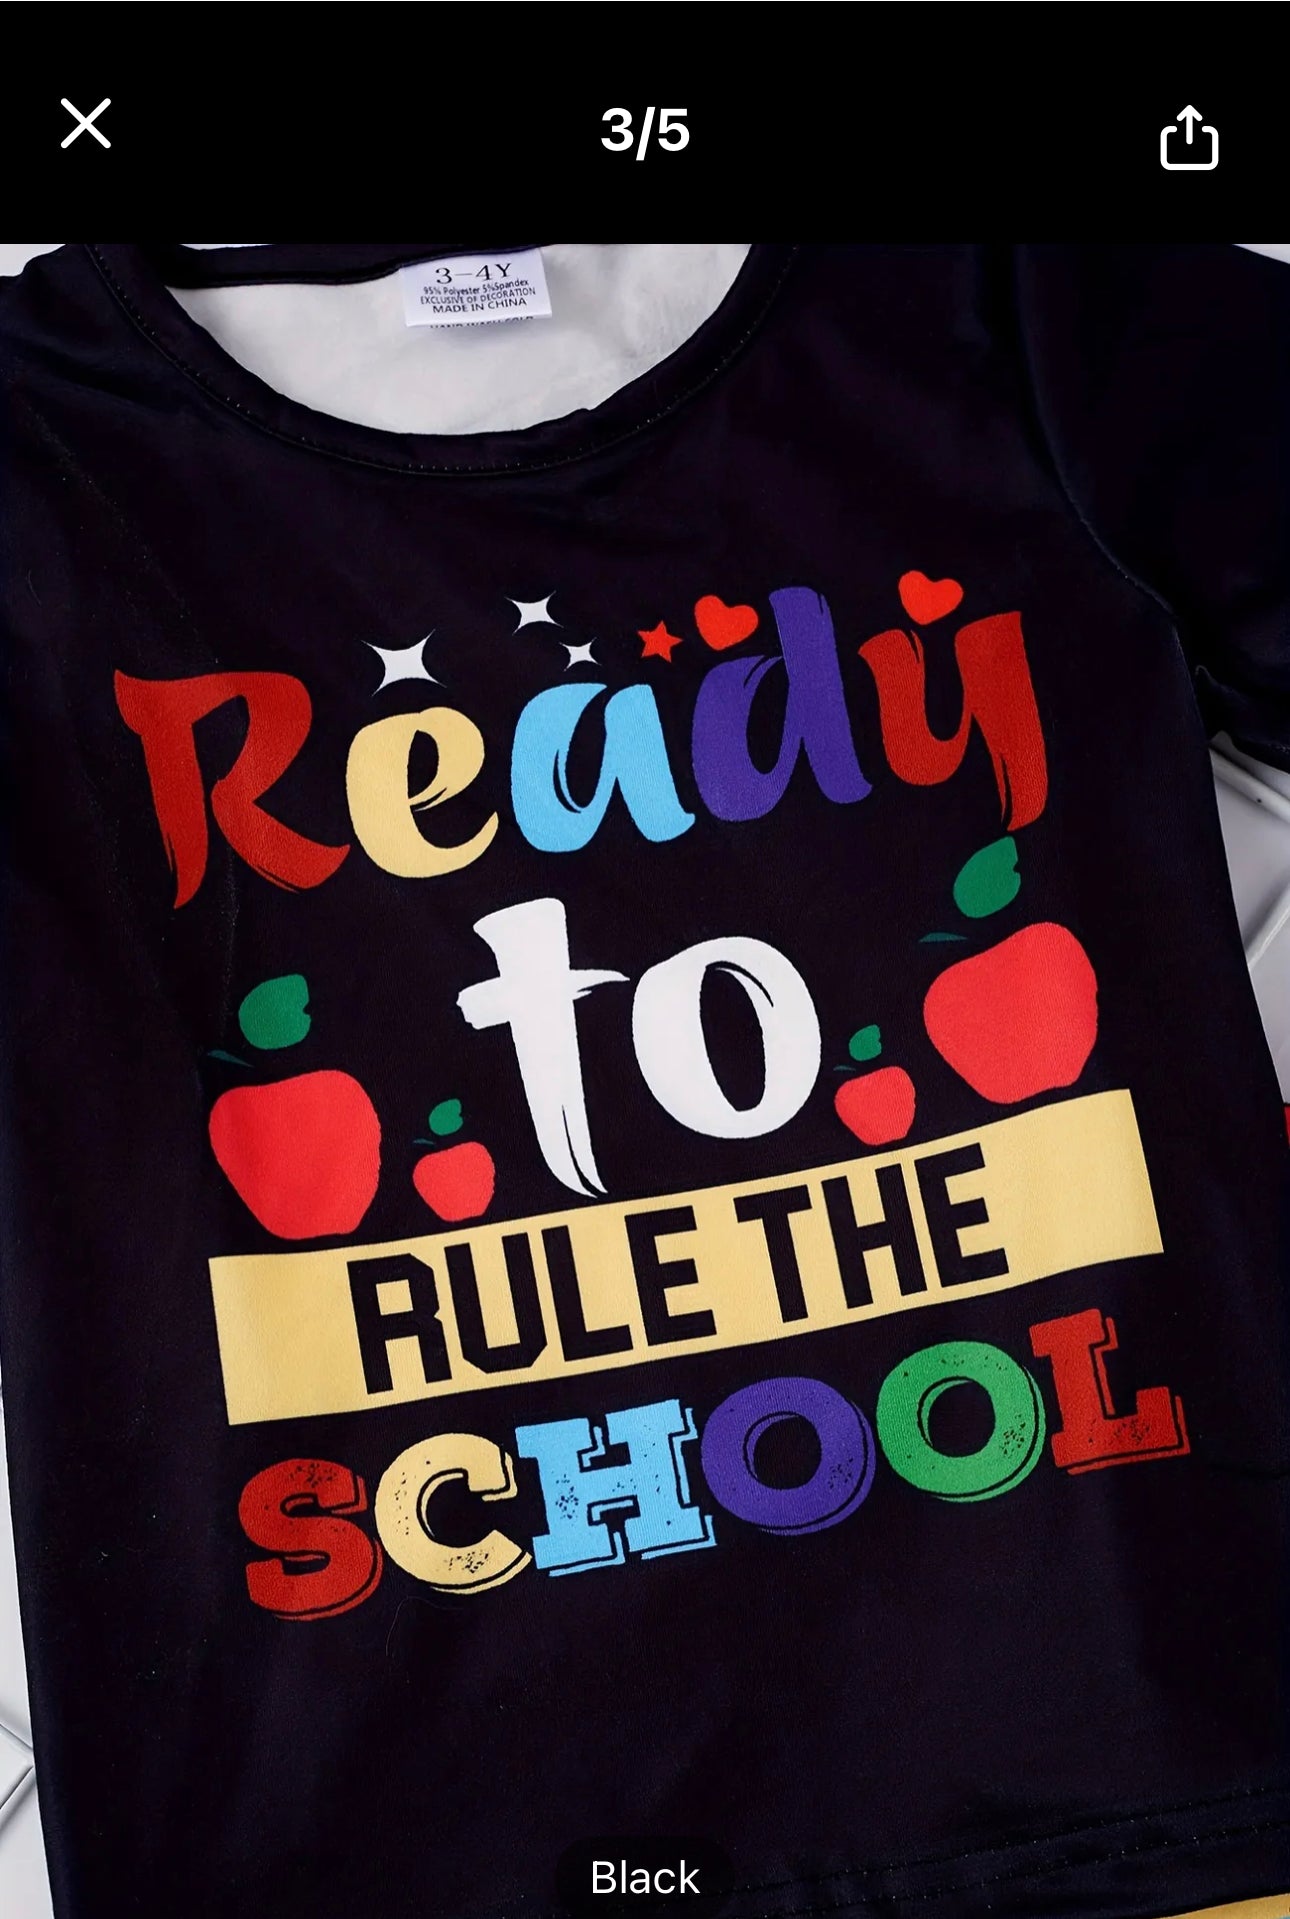 2pcs Toddler Girls Colorful Letter "READY TO RULE THE SCHOOL" Graphic T-Shirt Round Neck Tee Tops & Apple And Learning Stationery Tool Graphic Flare Leg Pants Set Kids Spring Summer Clothes